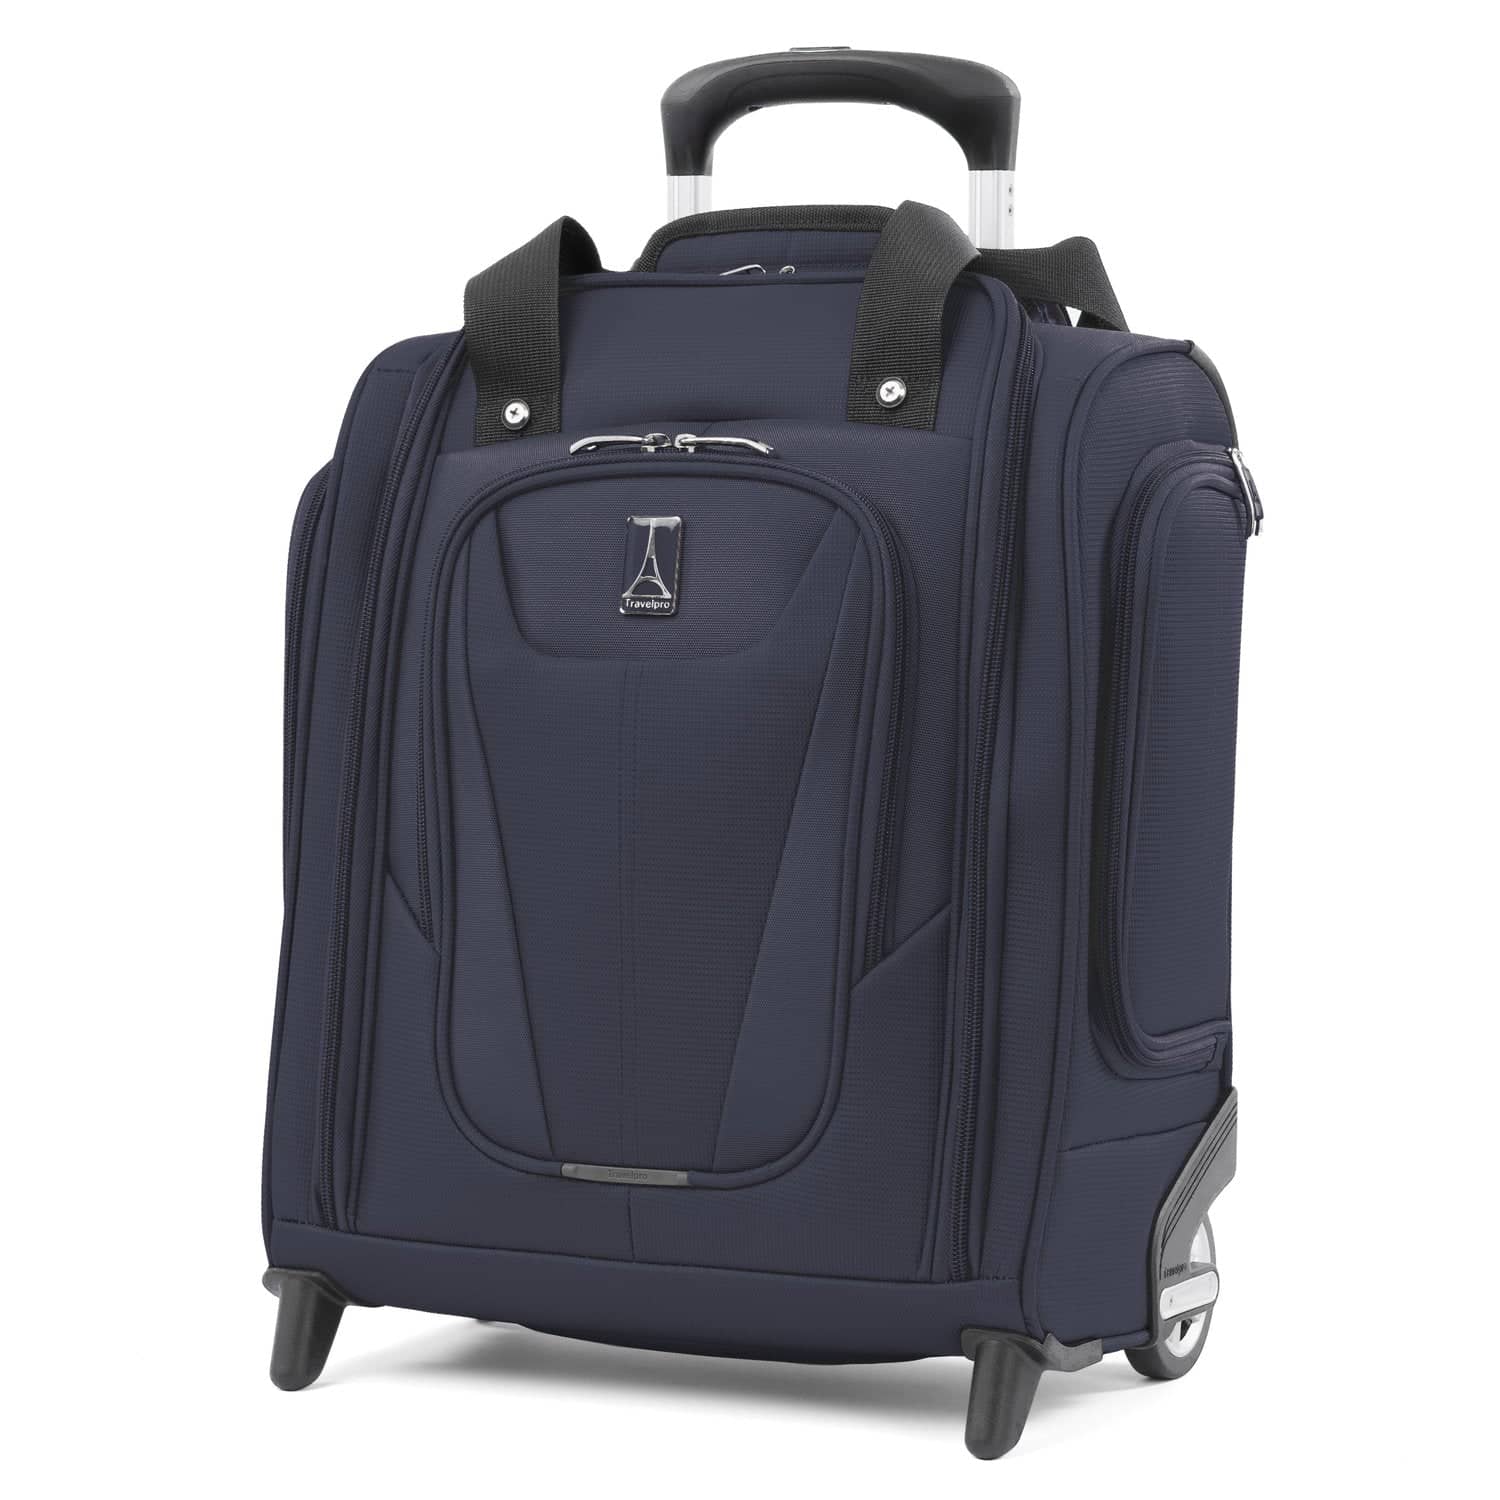 Travelpro Maxlite 5 Rolling Underseat Carry-On Luggage - Midnight Blue